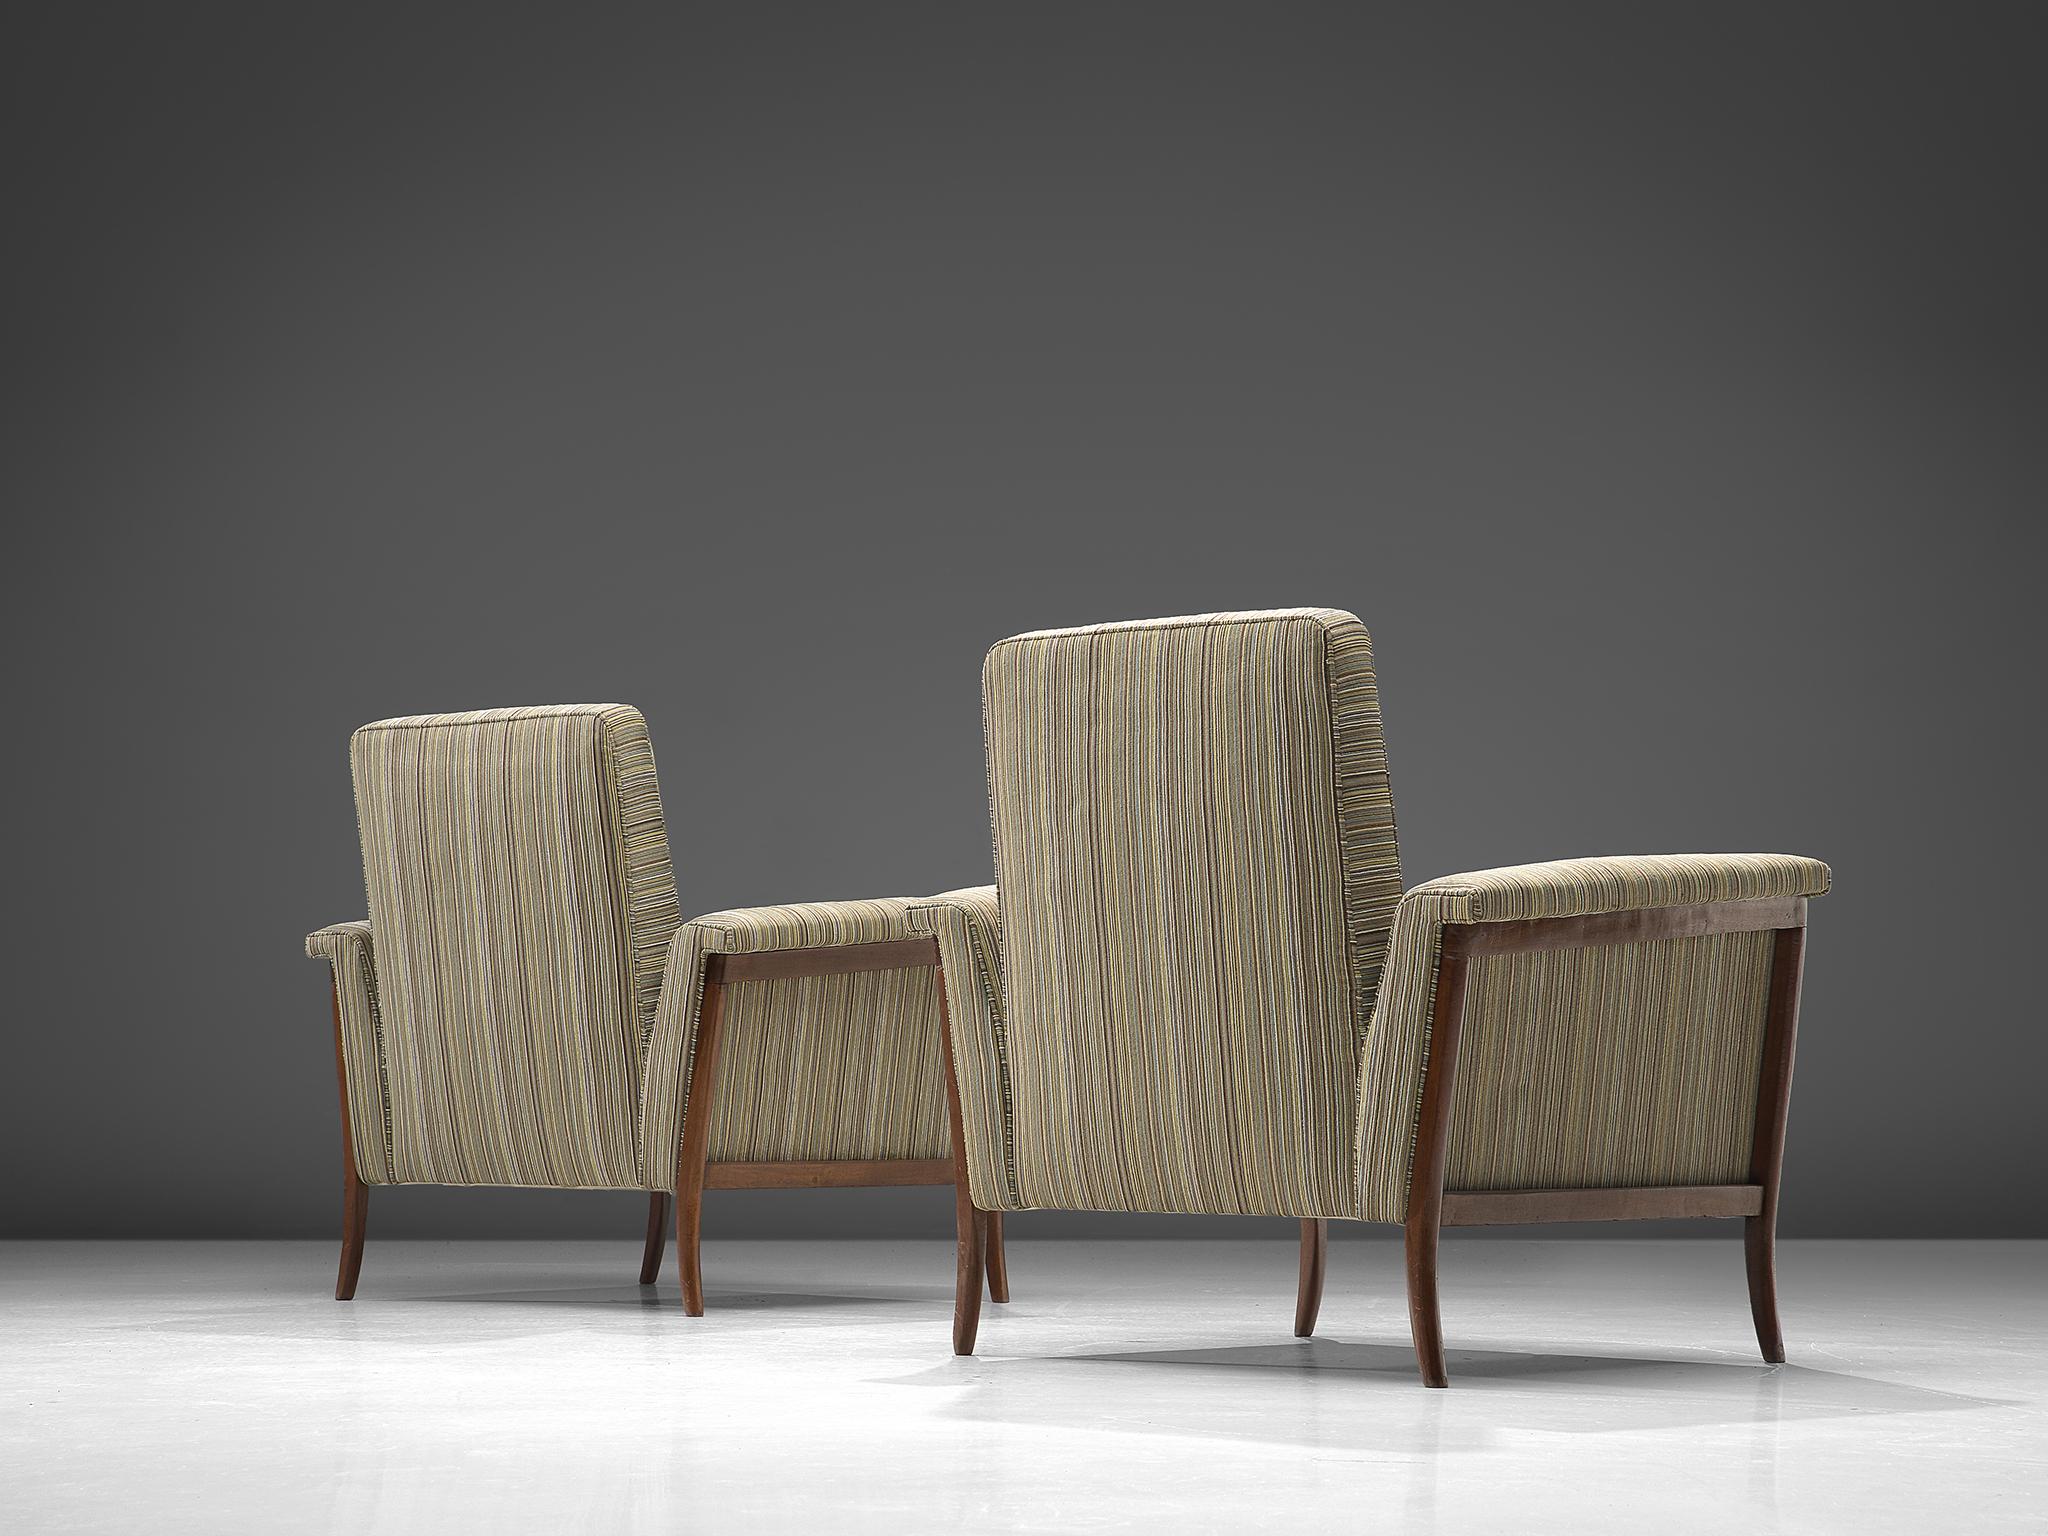 Mid-20th Century Brazilian Pair of Lounge Chairs in Mahogany and Striped Upholstery For Sale